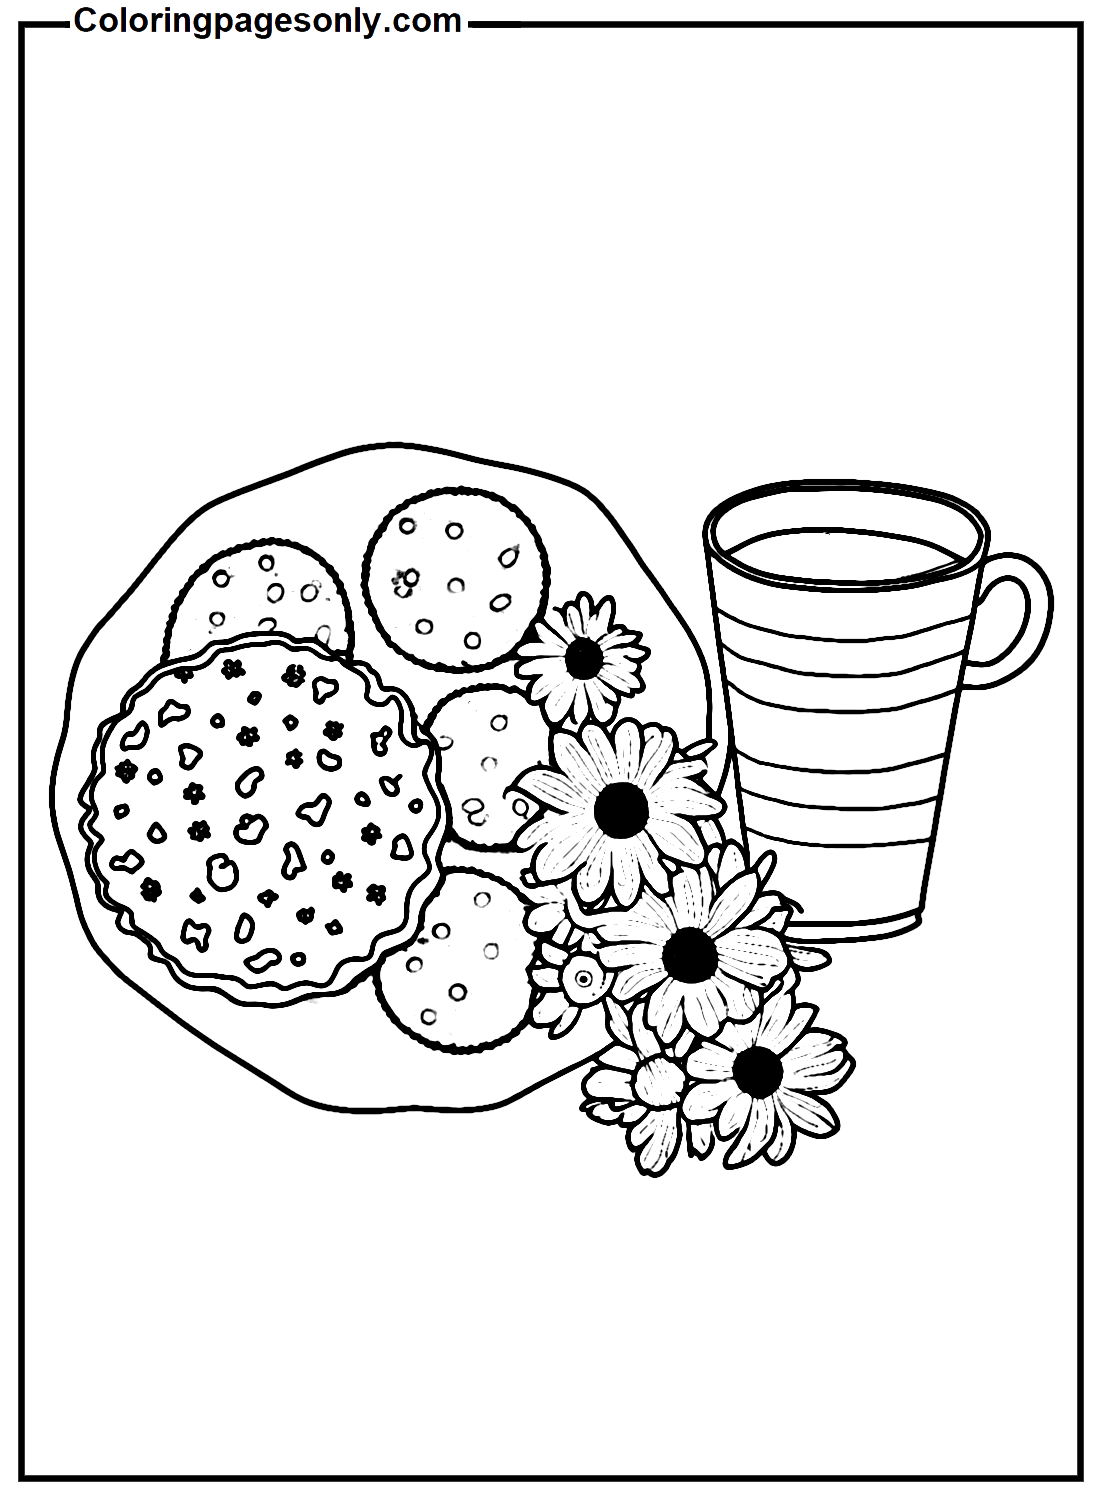 A Plate Of Cookies And A Coffee Cup Coloring Pages